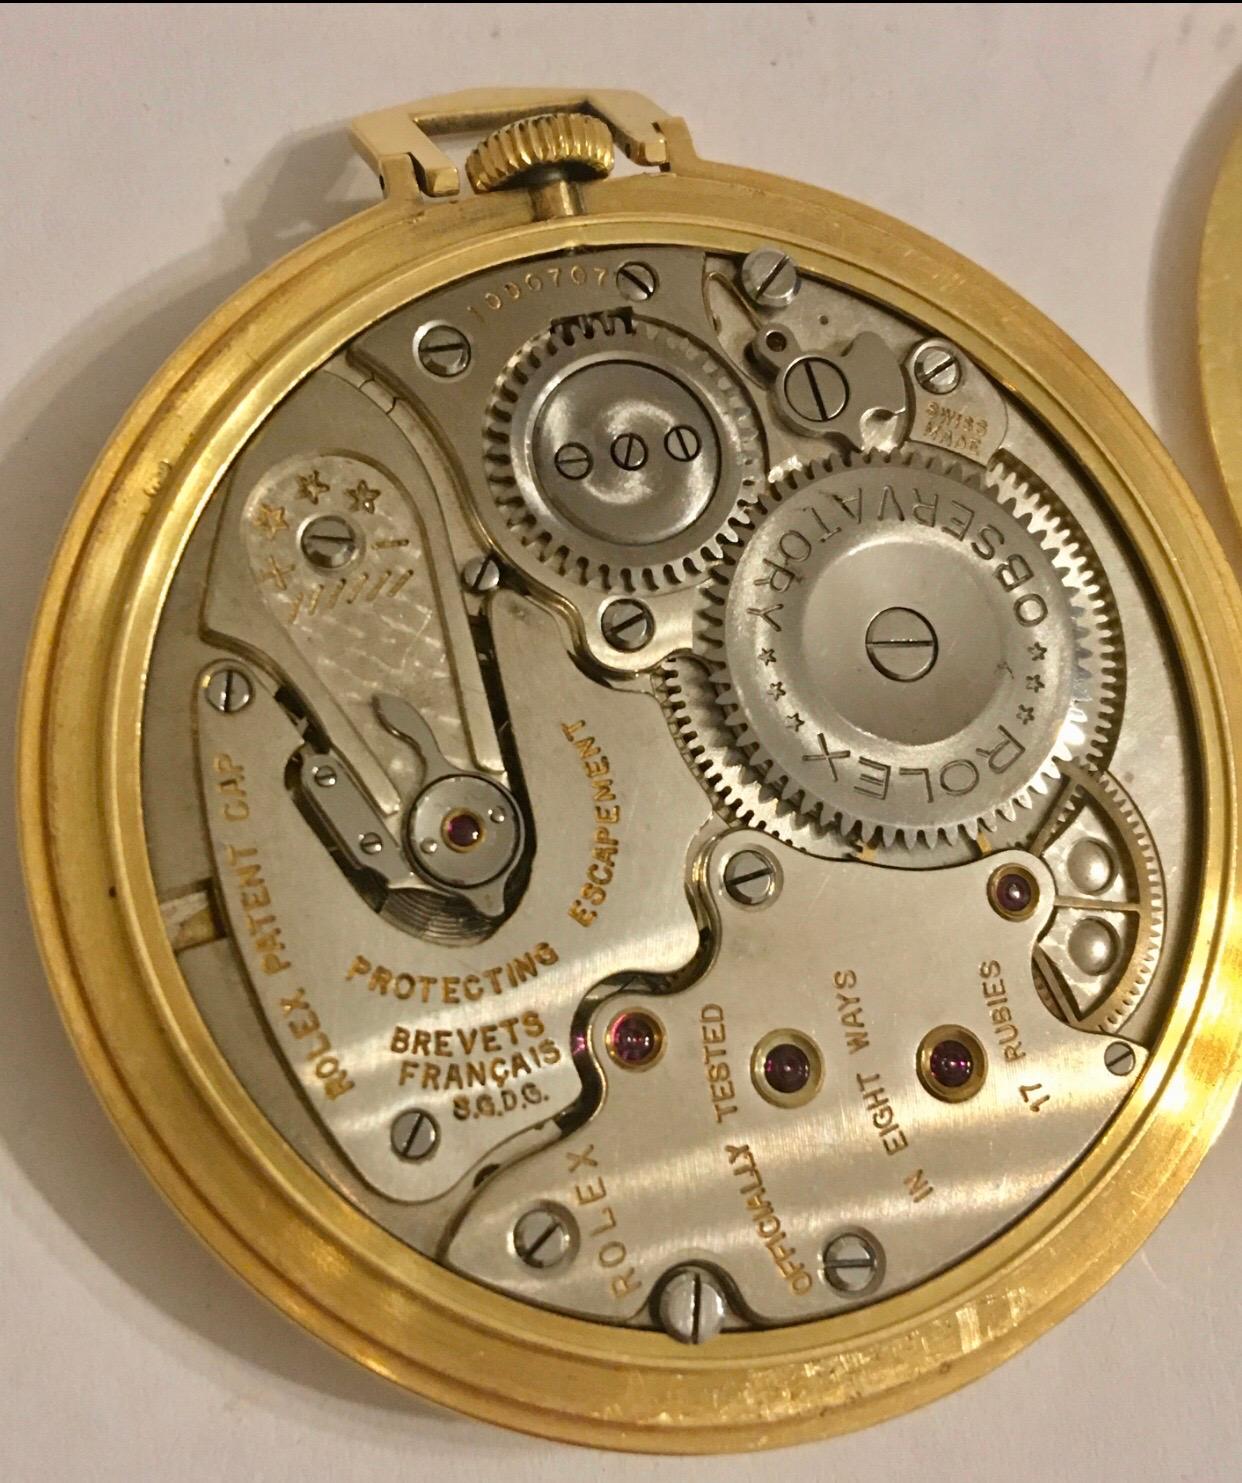 Rare 18k Gold Rolex Observatory Prince Imperial Dress Pocket Watch, circa 1950s For Sale 4